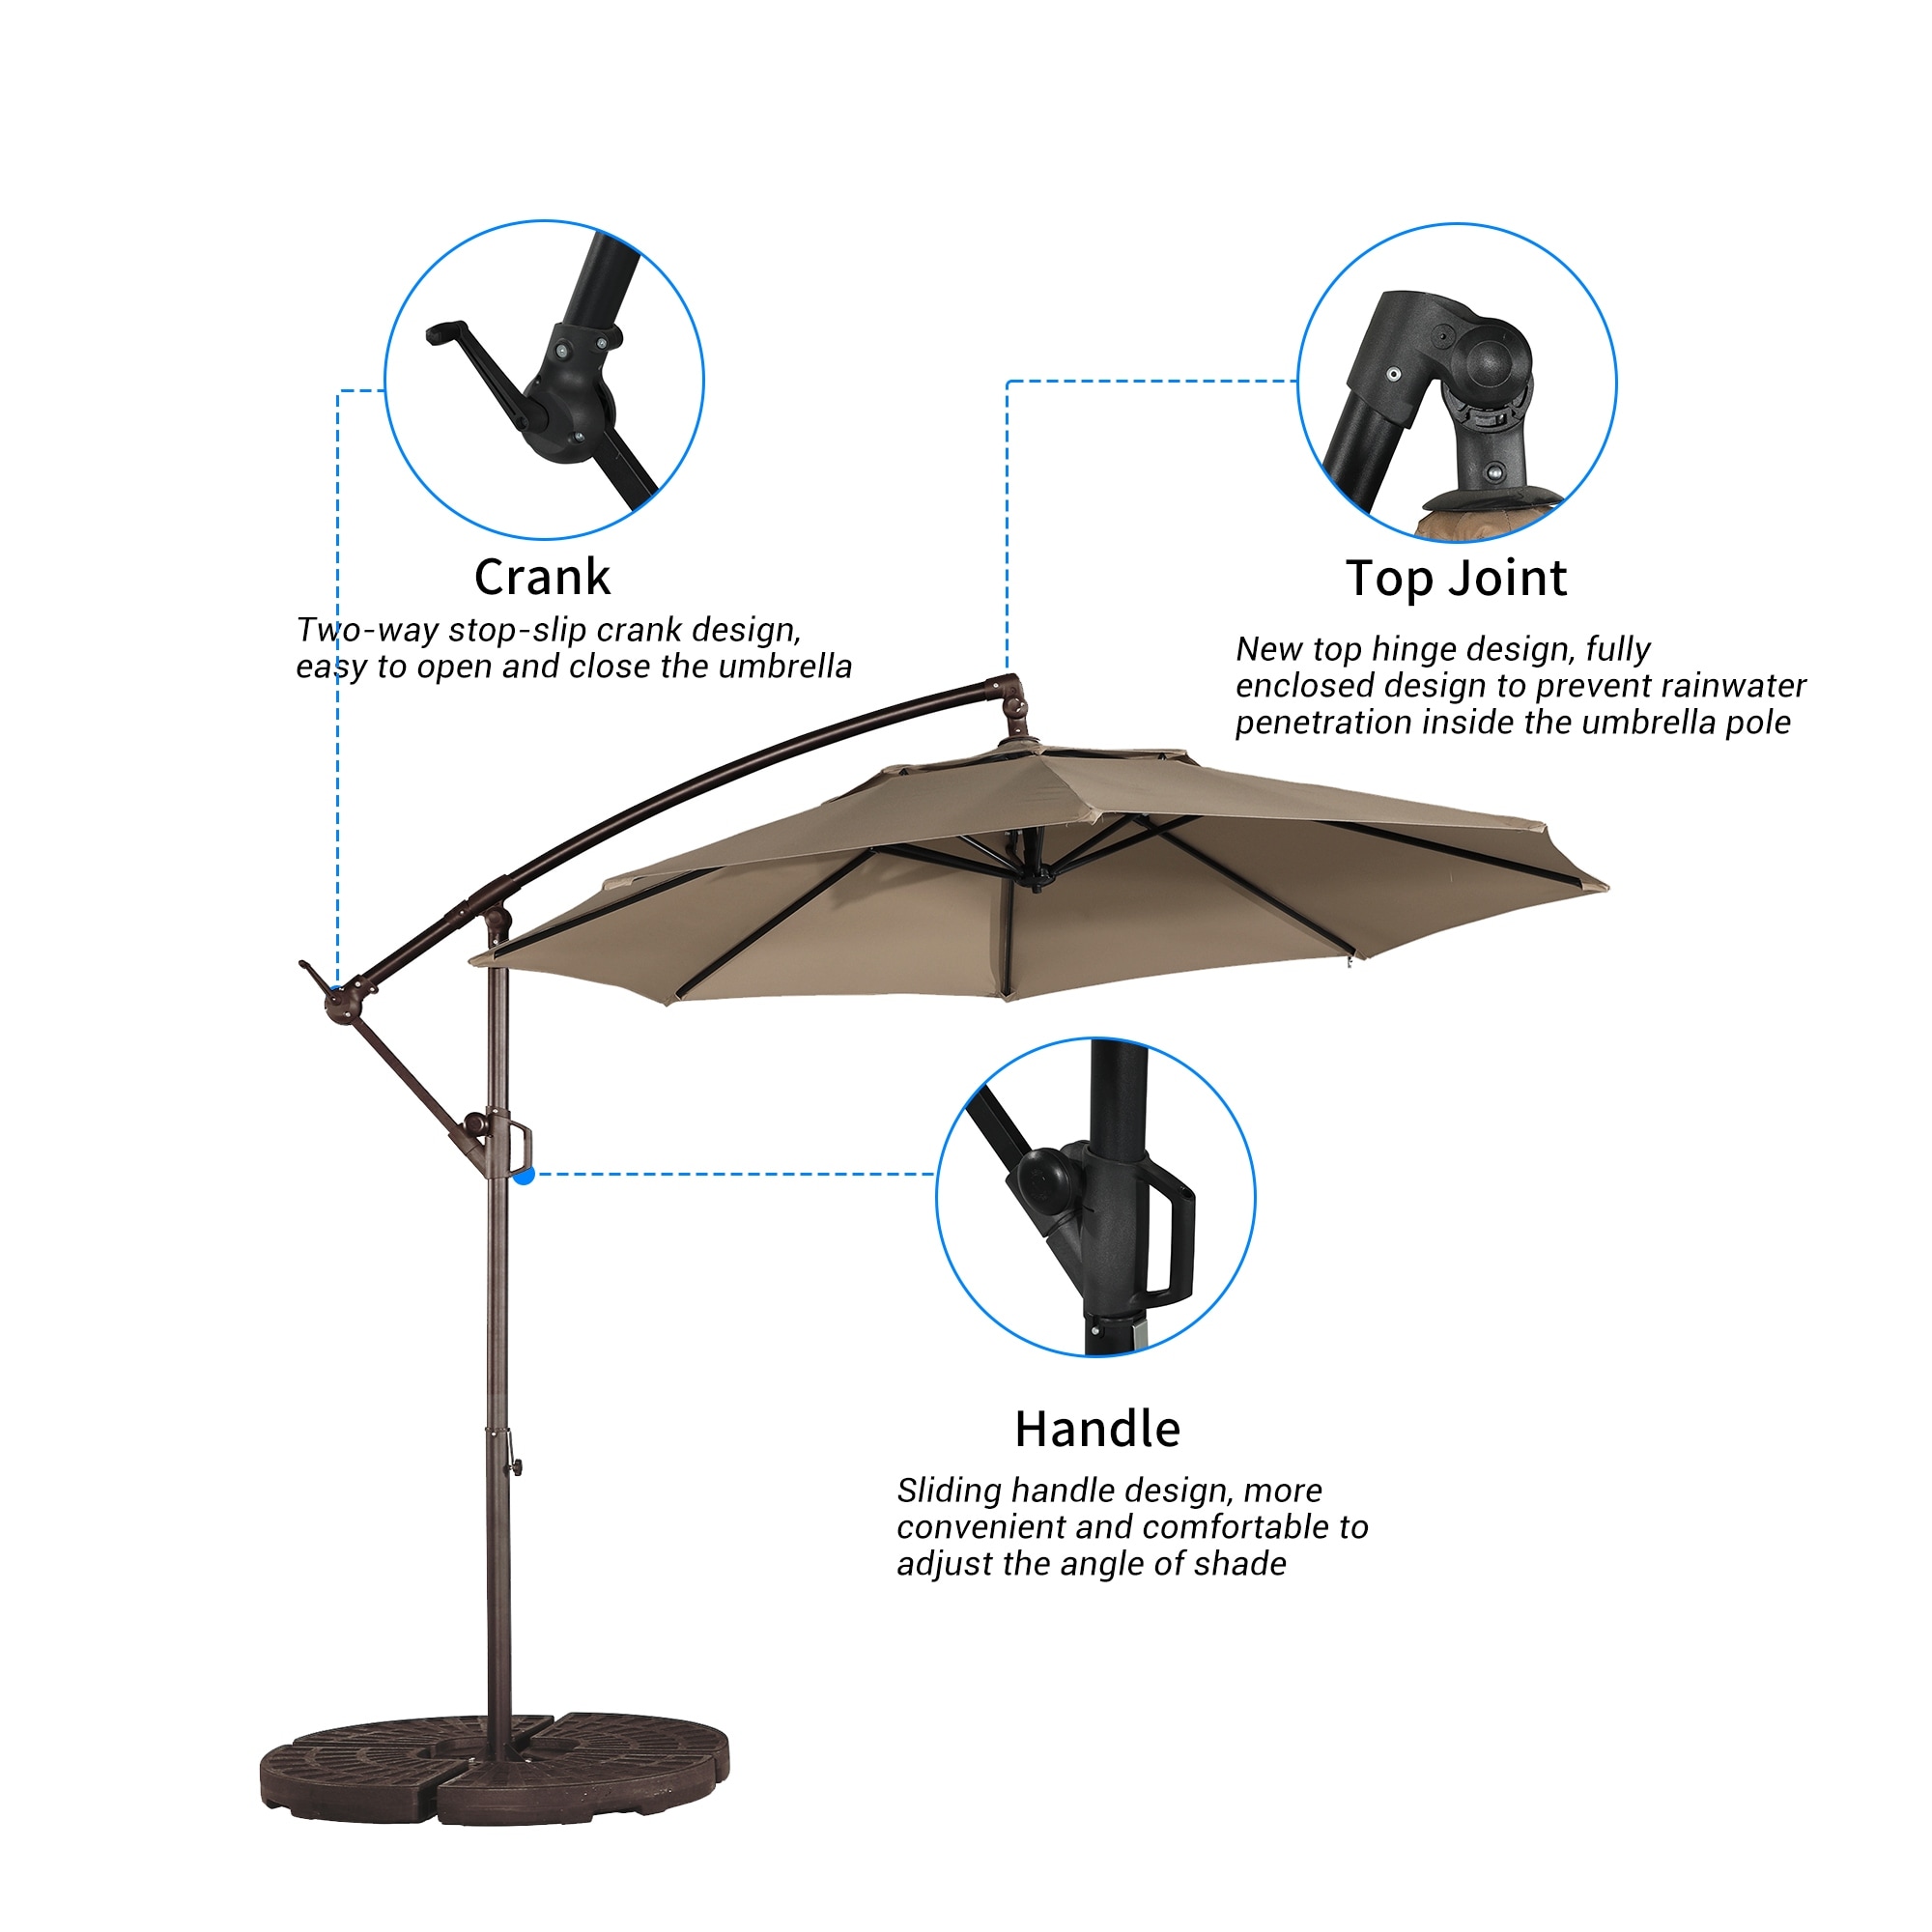 https://ak1.ostkcdn.com/images/products/is/images/direct/711712bcadfcd0f9656595e6b6a39e2cff7db2af/Clihome-10Ft-Outdoor-Crank-Cantilever-Patio-Umbrella-Without-Base.jpg